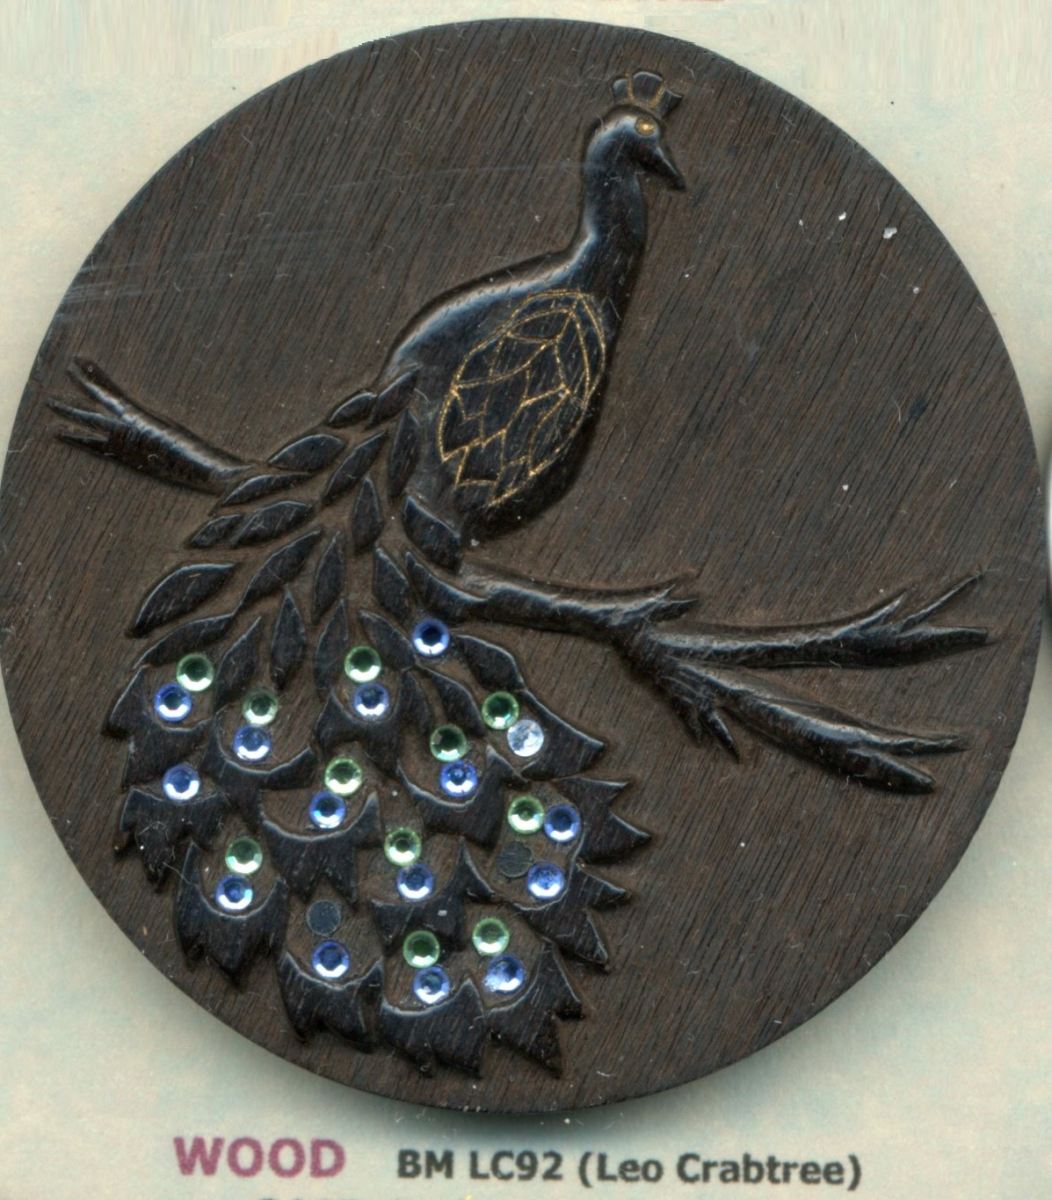 Peacock carved on wood